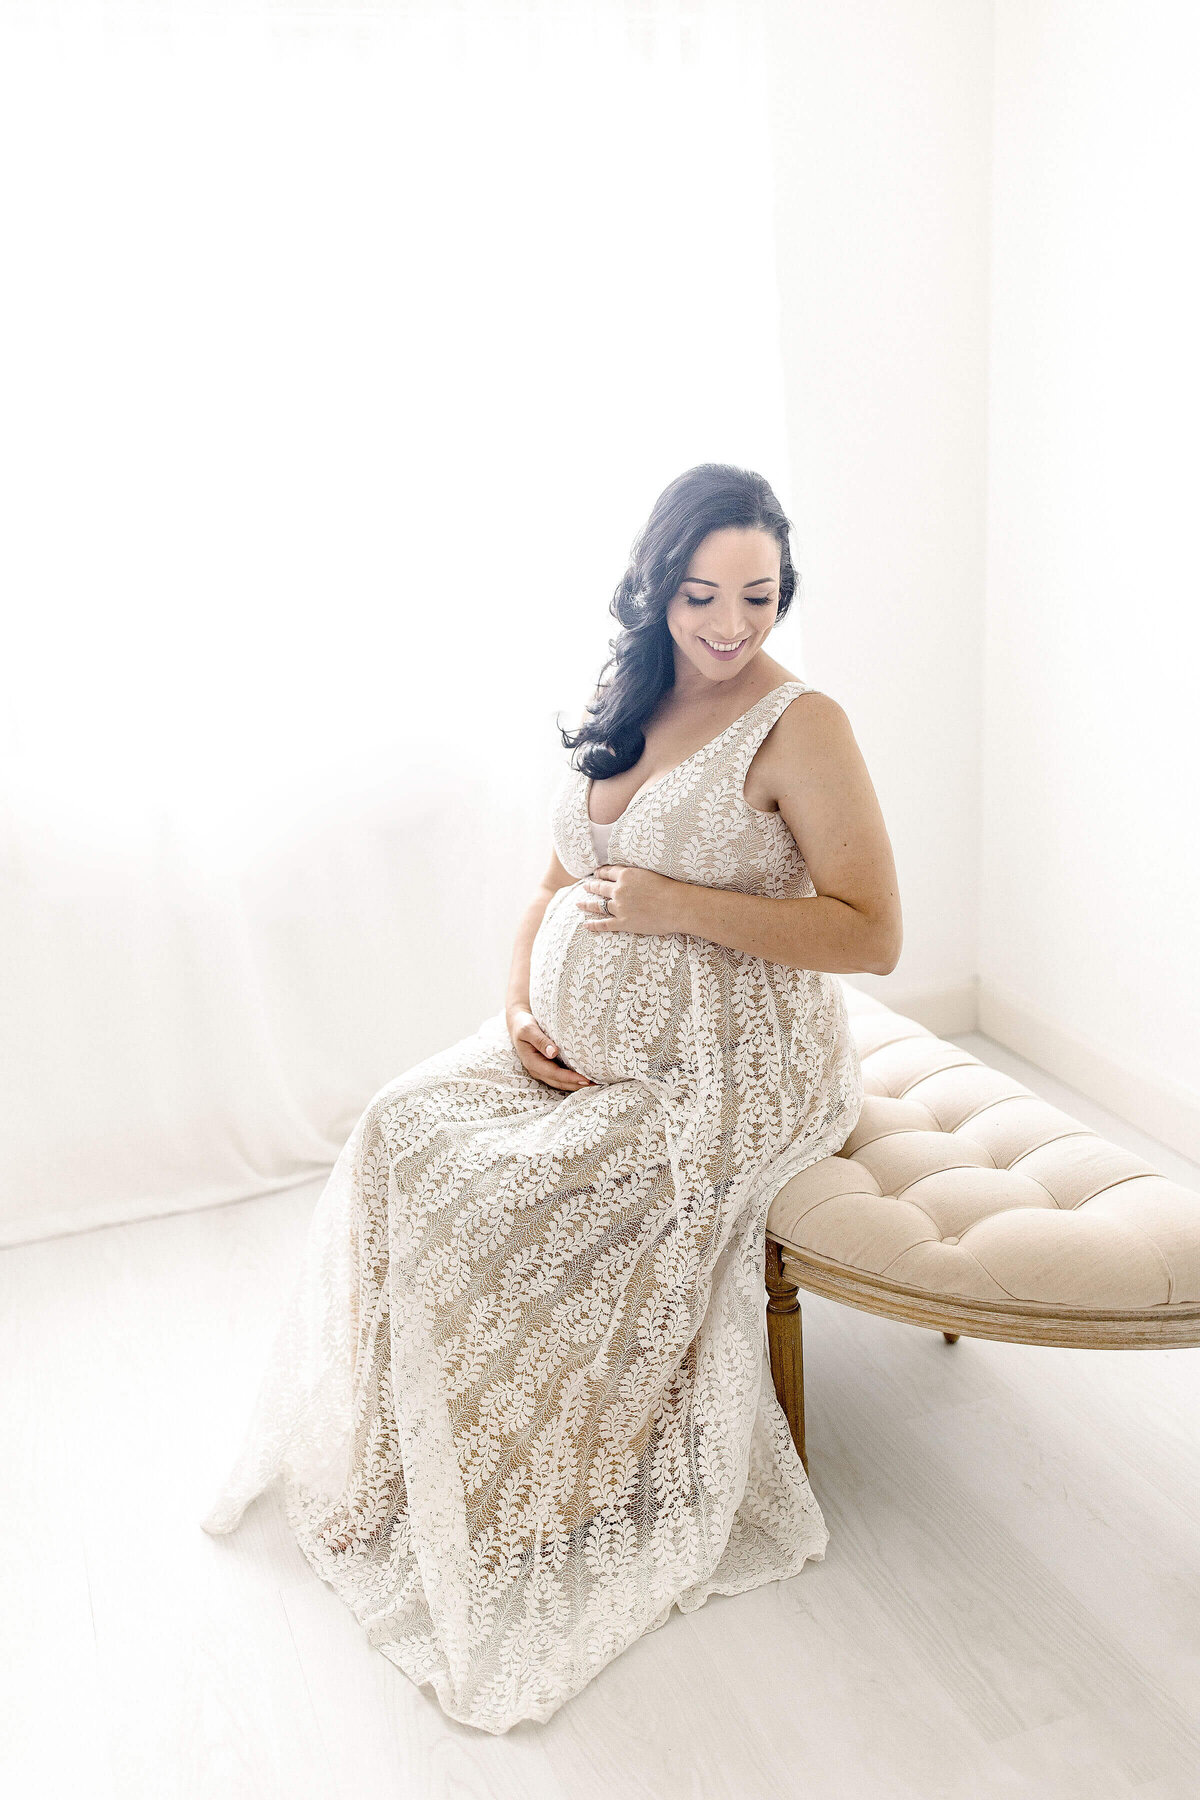 fort-lauderdale-maternity-photography_0037